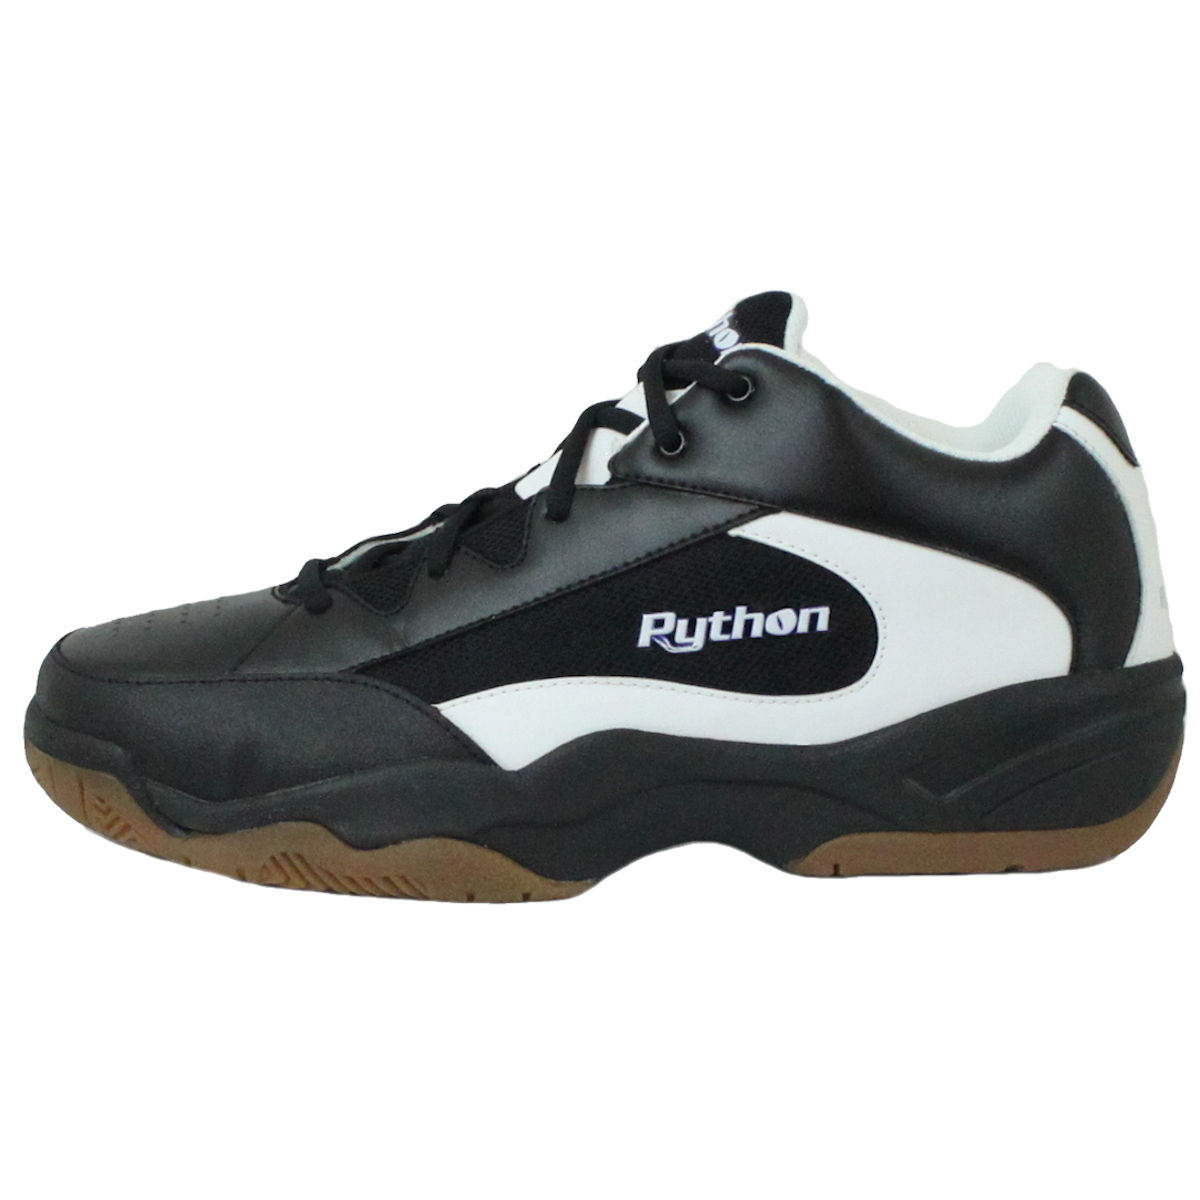 Python Wide (EE) Width Indoor Black Mid Size Racquetball (Squash, Badminton, Volleyball) Shoe - image 1 of 6